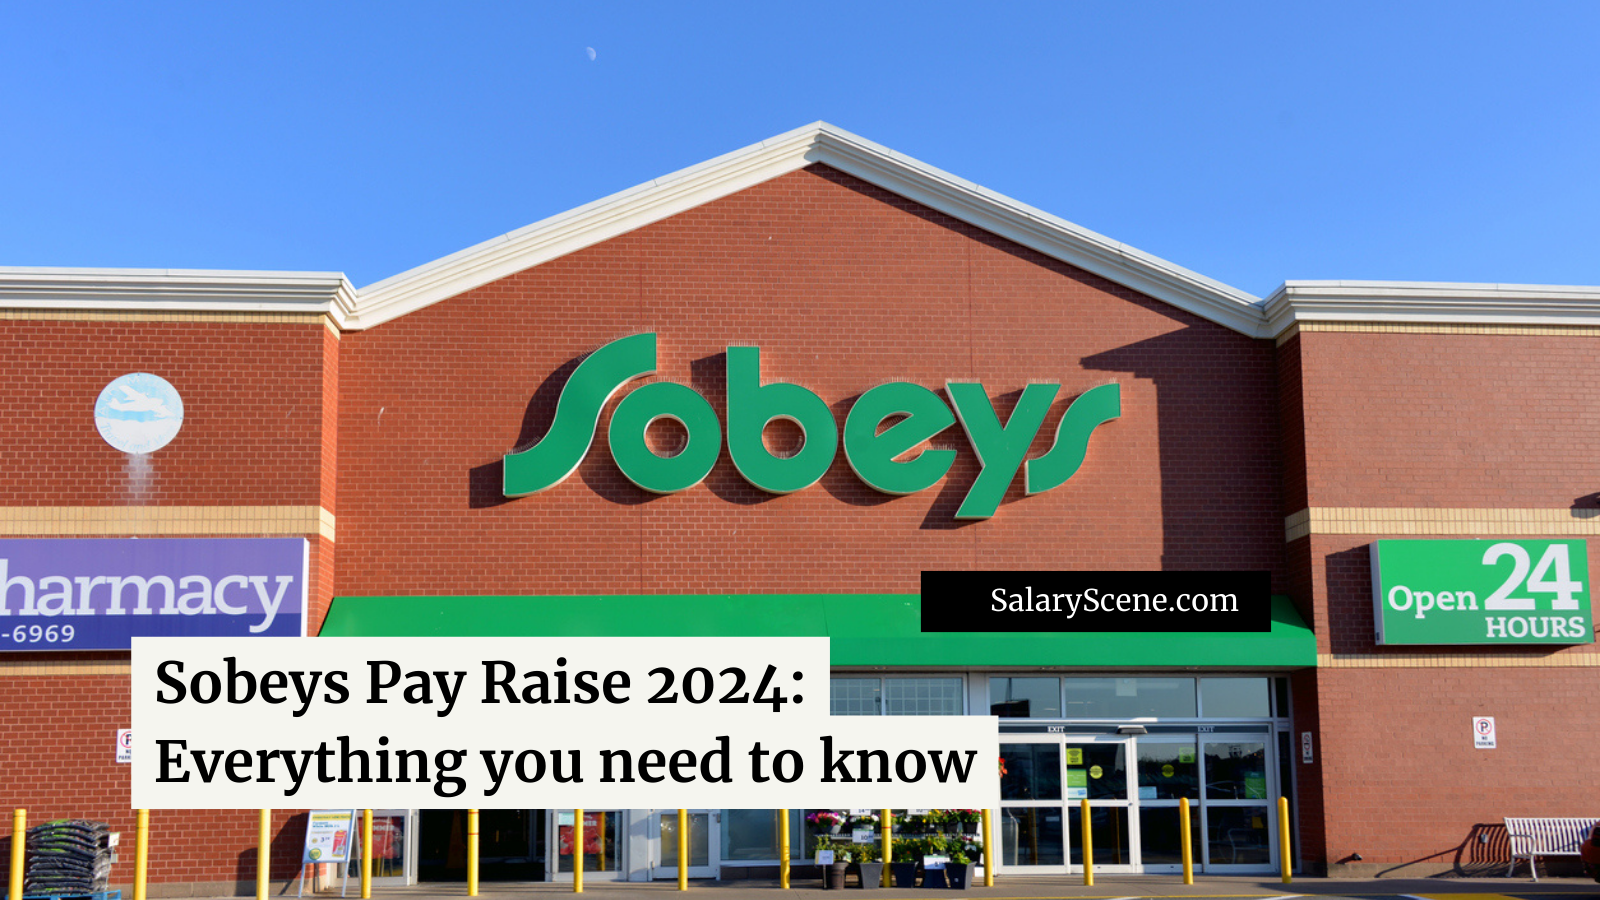 Sobeys Pay Raise 2024 Everything you need to know